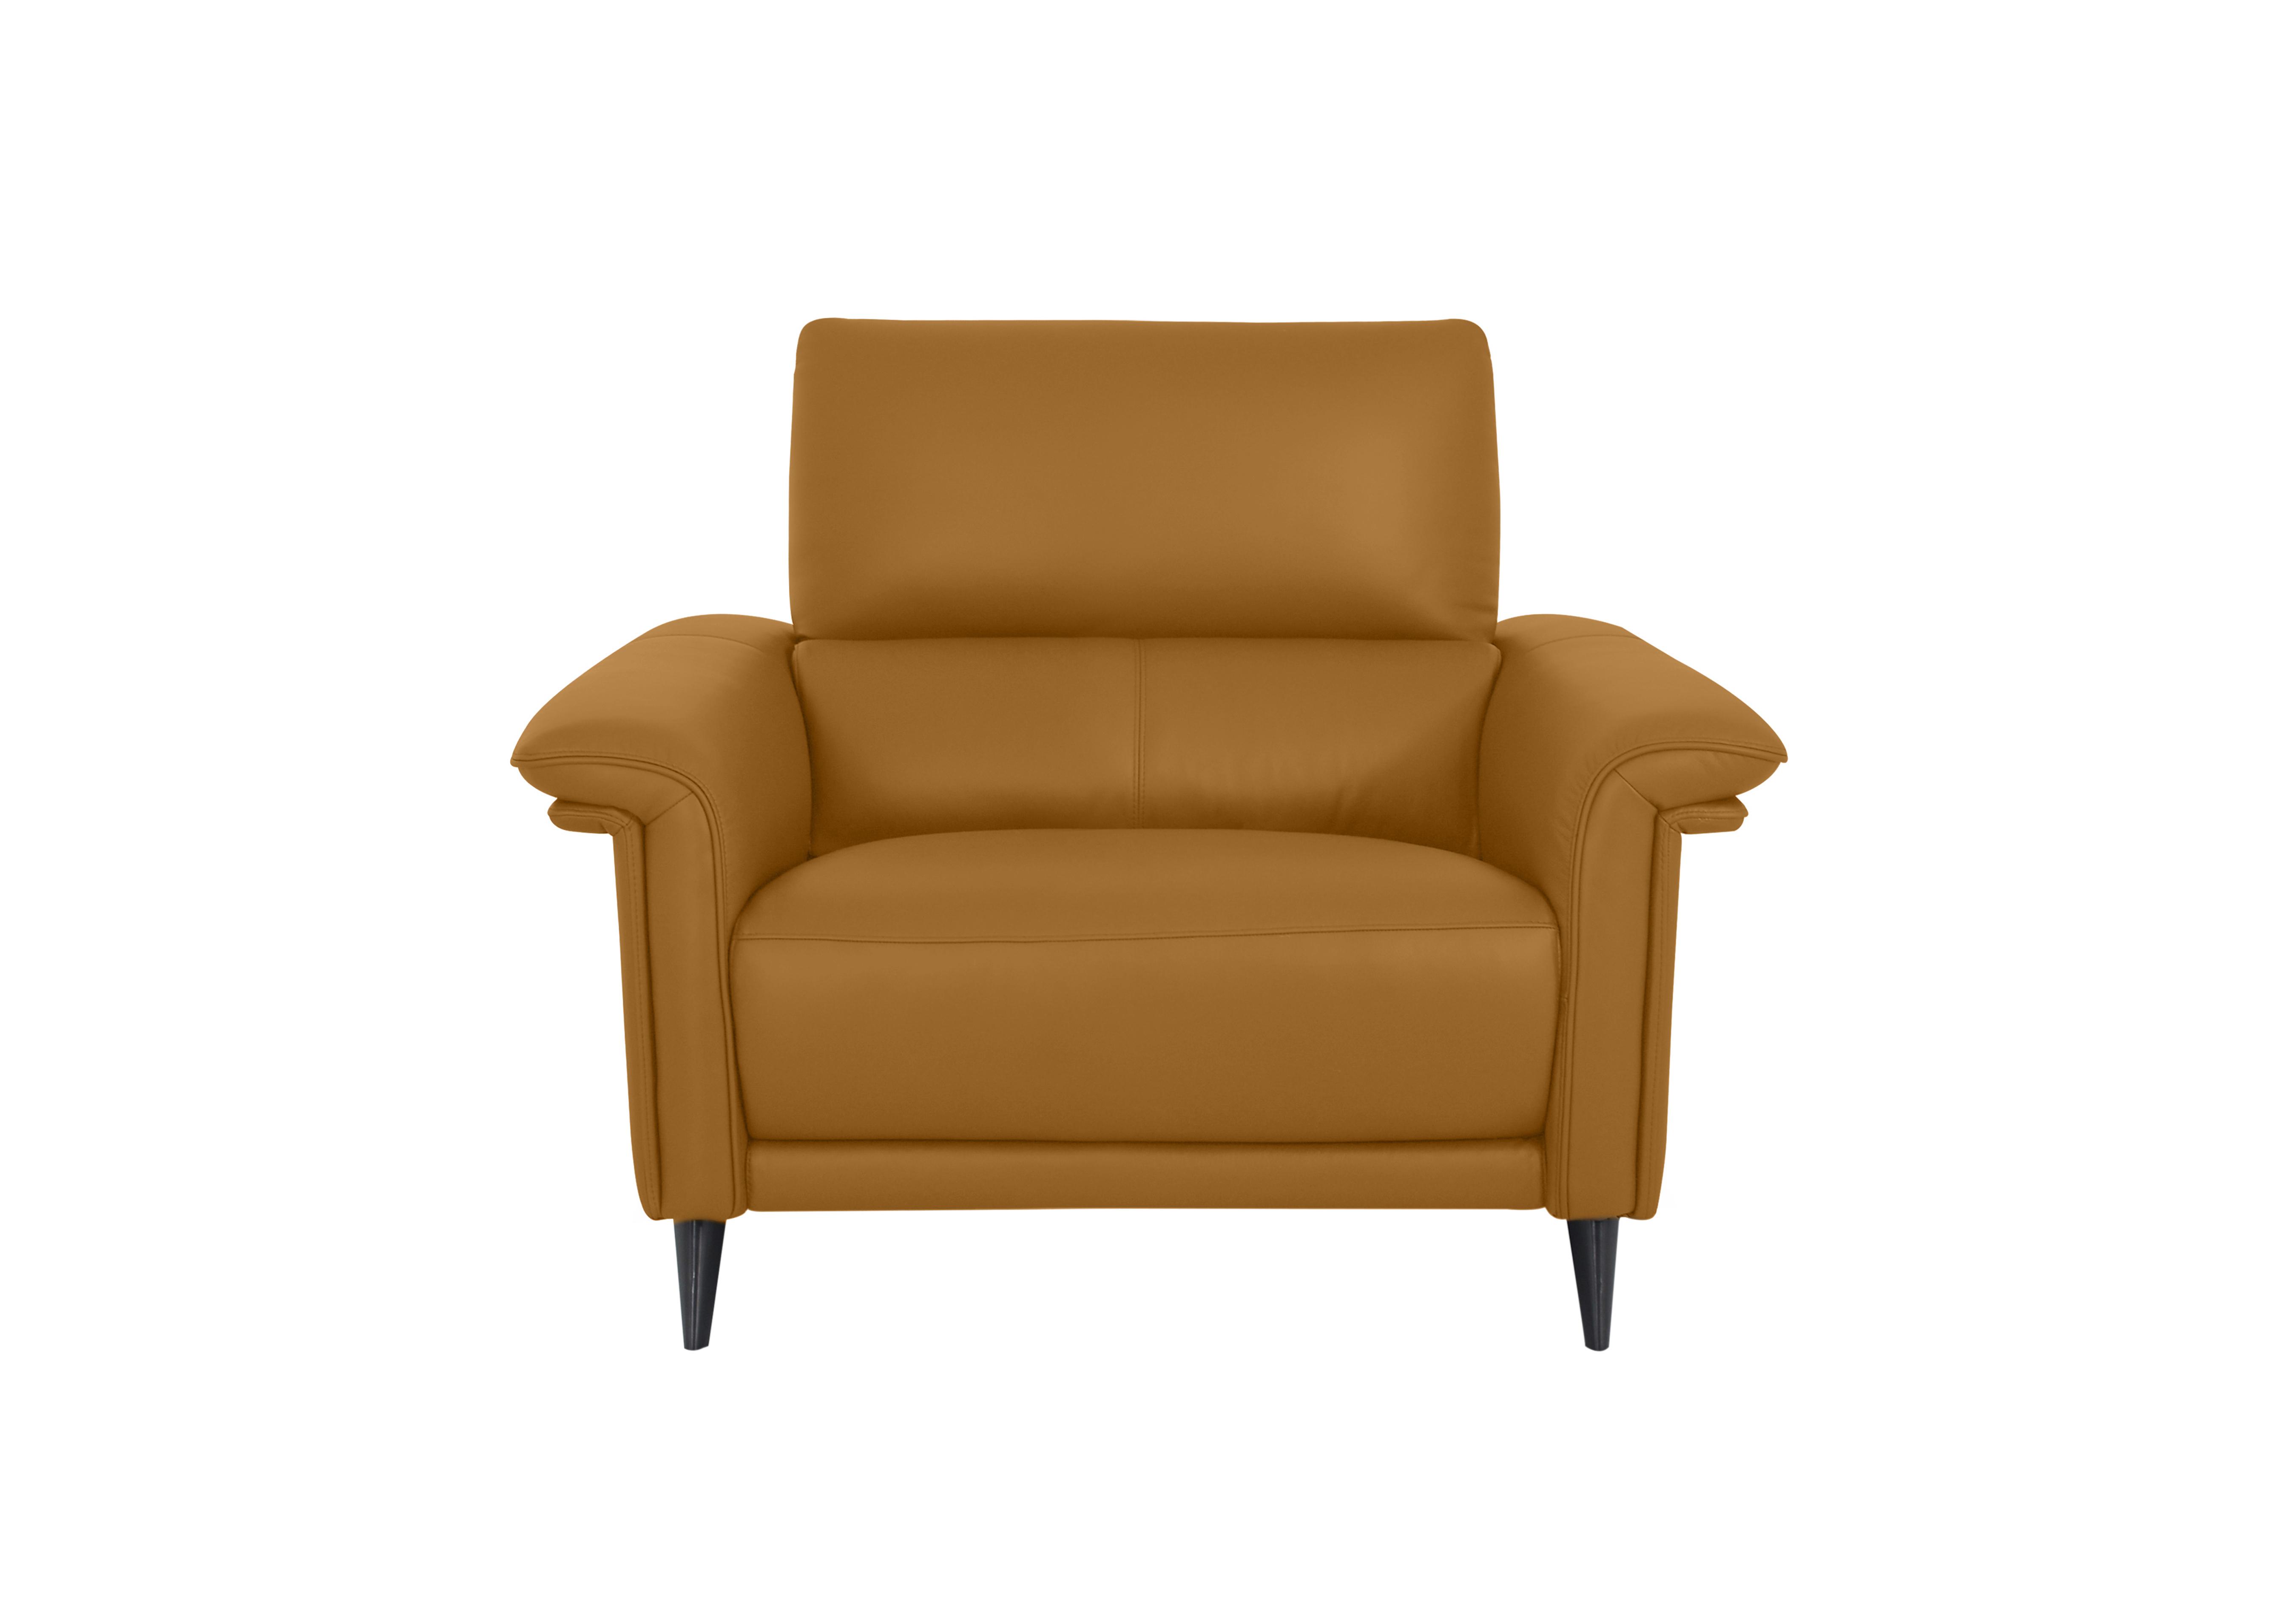 Huxley Leather Chair in Np-606e Honey Yellow on Furniture Village